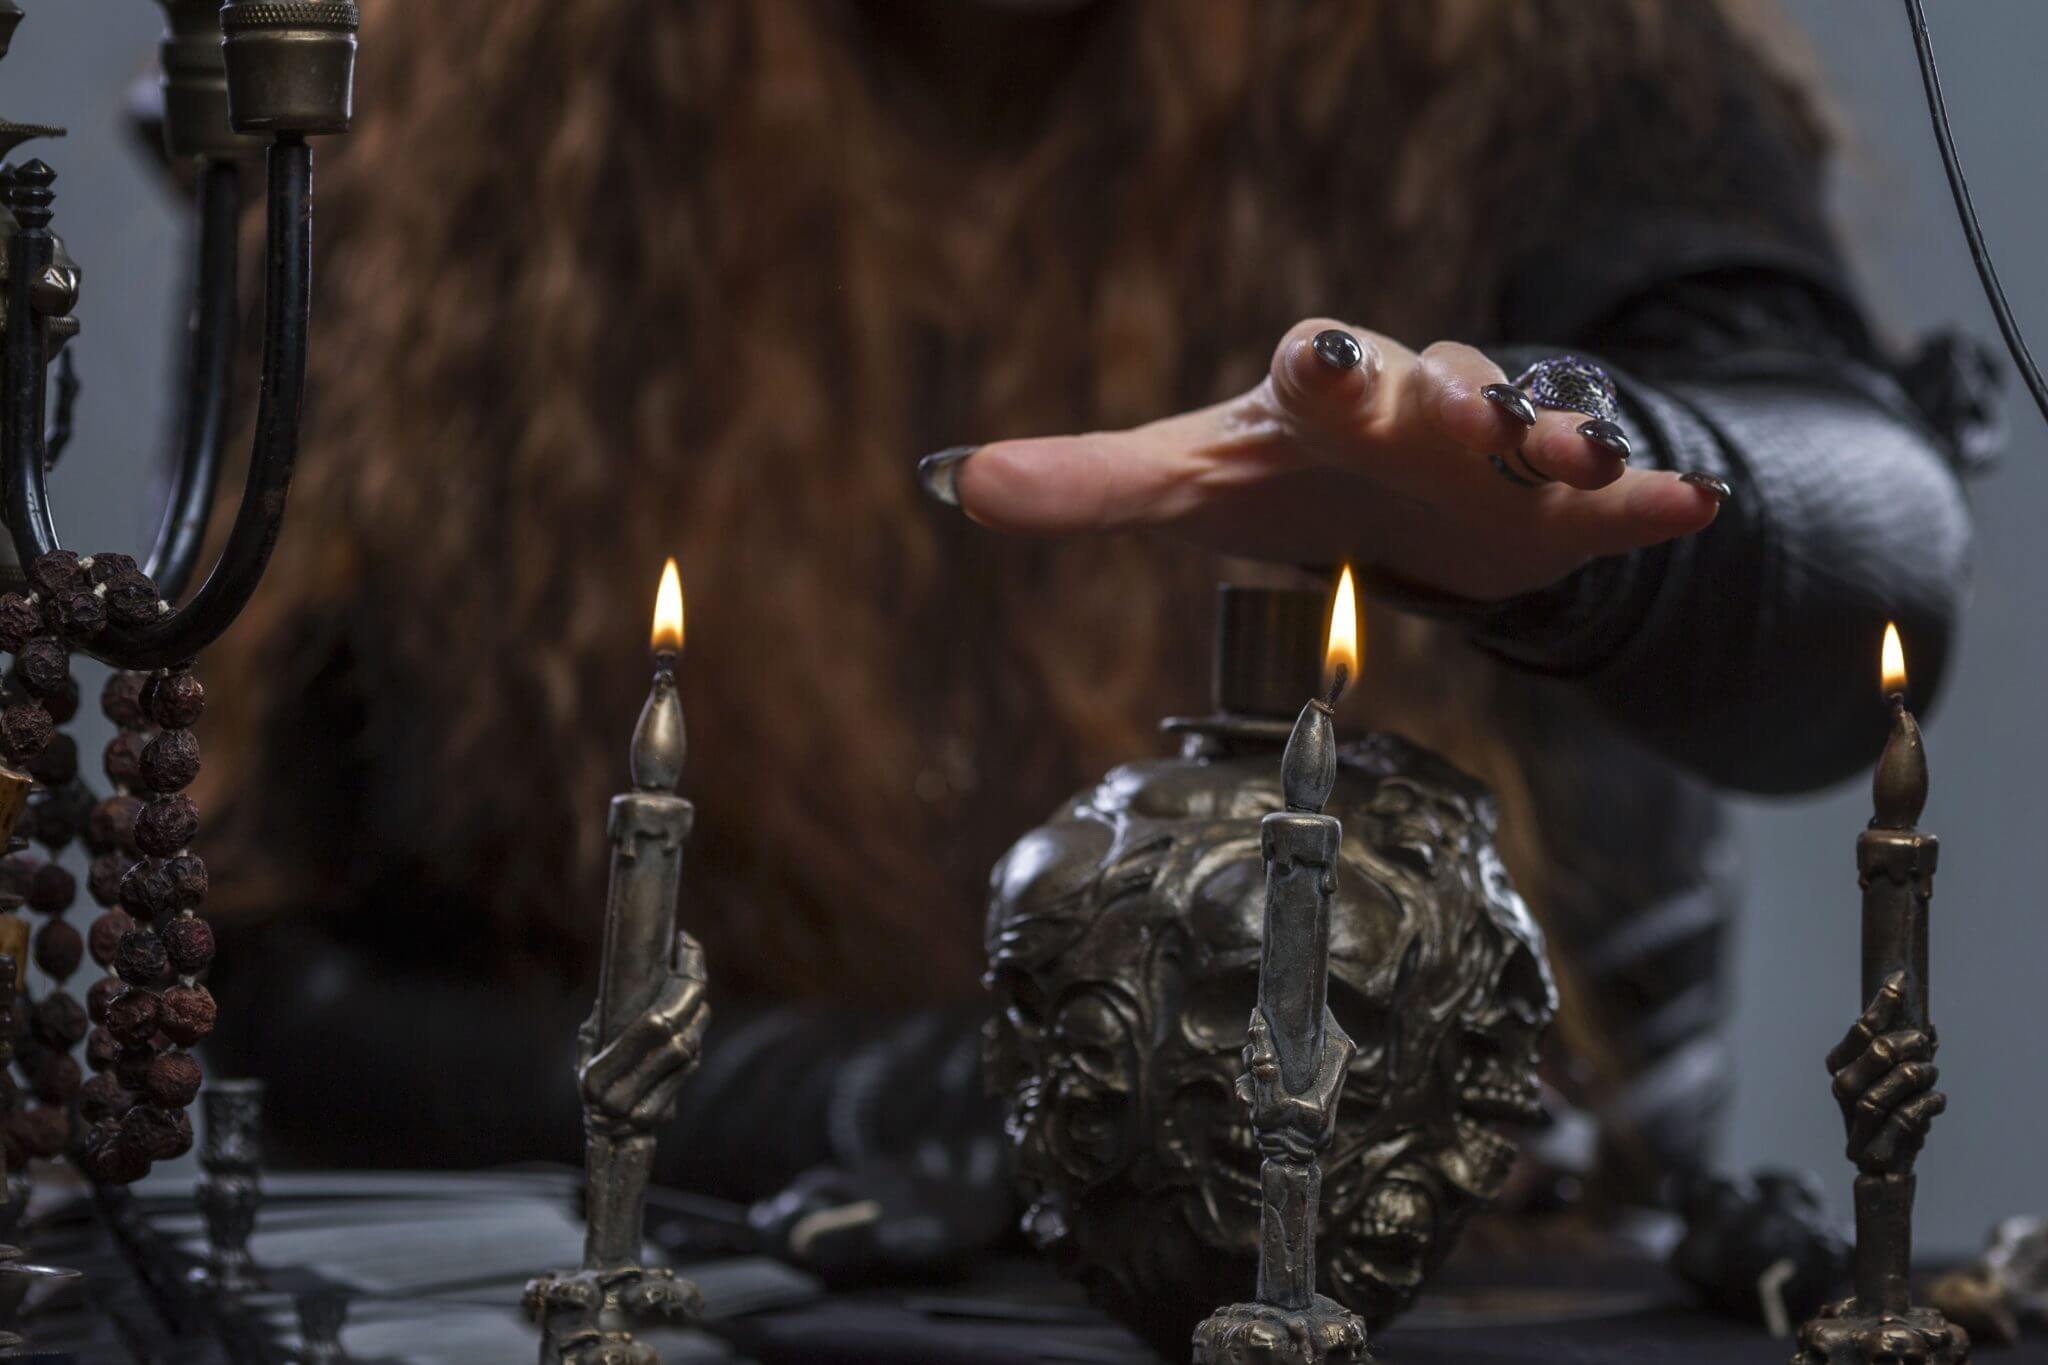 how to make your own magick spells